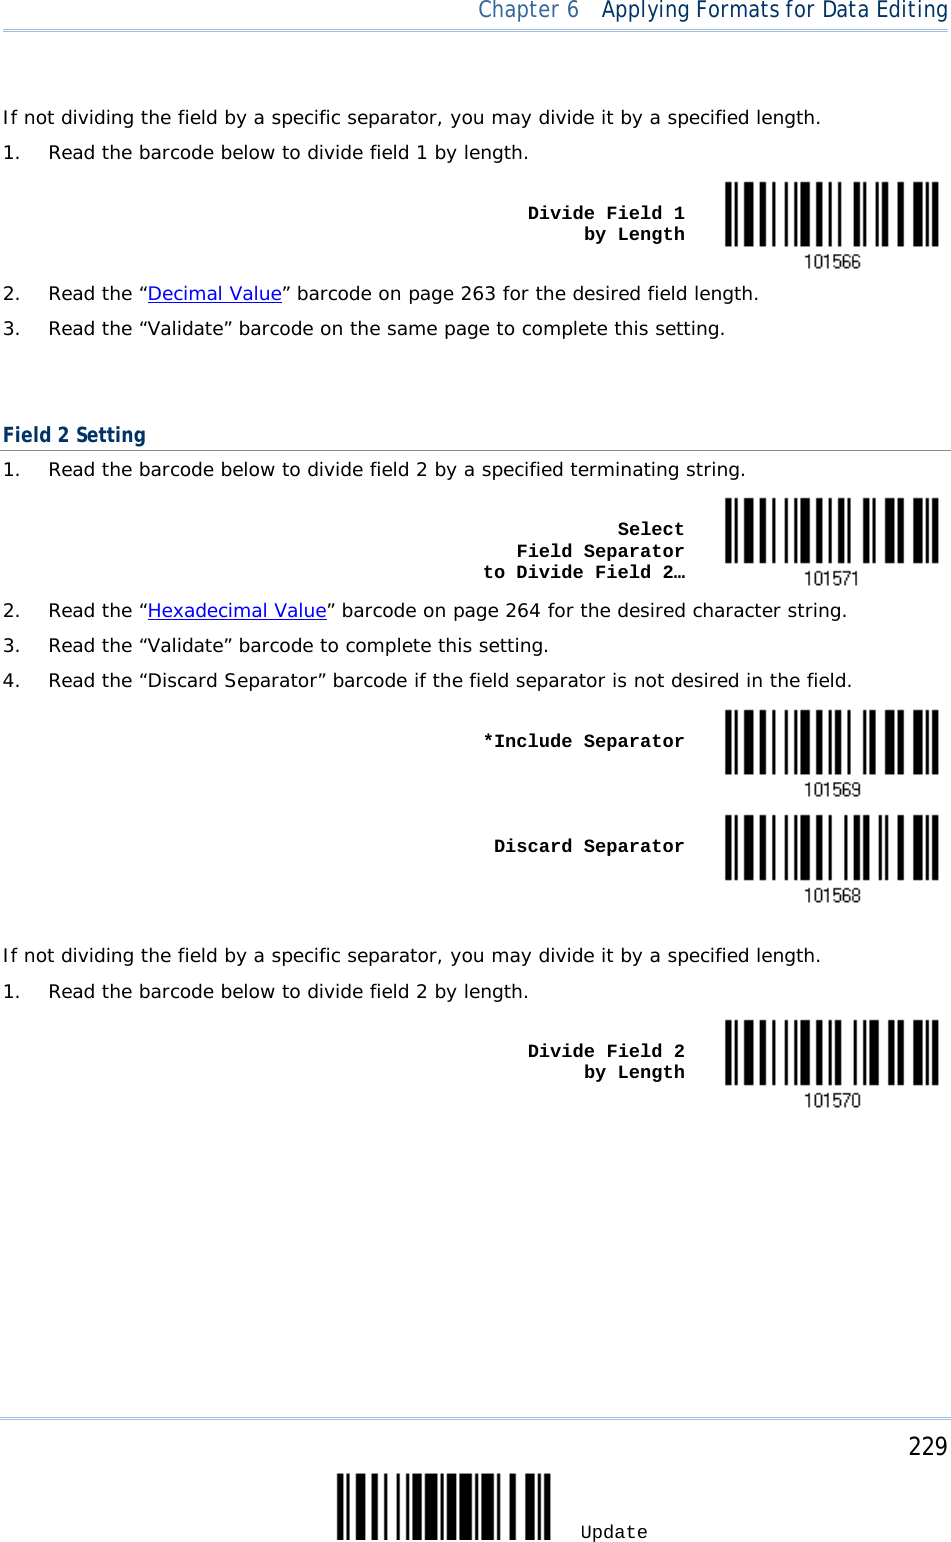  Chapter 6  Applying Formats for Data Editing   If not dividing the field by a specific separator, you may divide it by a specified length. 1. Read the barcode below to divide field 1 by length.    Divide Field 1      by Length  2. Read the “Decimal Value” barcode on page 263 for the desired field length. 3. Read the “Validate” barcode on the same page to complete this setting.   Field 2 Setting 1. Read the barcode below to divide field 2 by a specified terminating string.    Select          Field Separator    to Divide Field 2…  2. Read the “Hexadecimal Value” barcode on page 264 for the desired character string. 3. Read the “Validate” barcode to complete this setting. 4. Read the “Discard Separator” barcode if the field separator is not desired in the field.    *Include Separator     Discard Separator   If not dividing the field by a specific separator, you may divide it by a specified length. 1. Read the barcode below to divide field 2 by length.    Divide Field 2      by Length      229 Update 